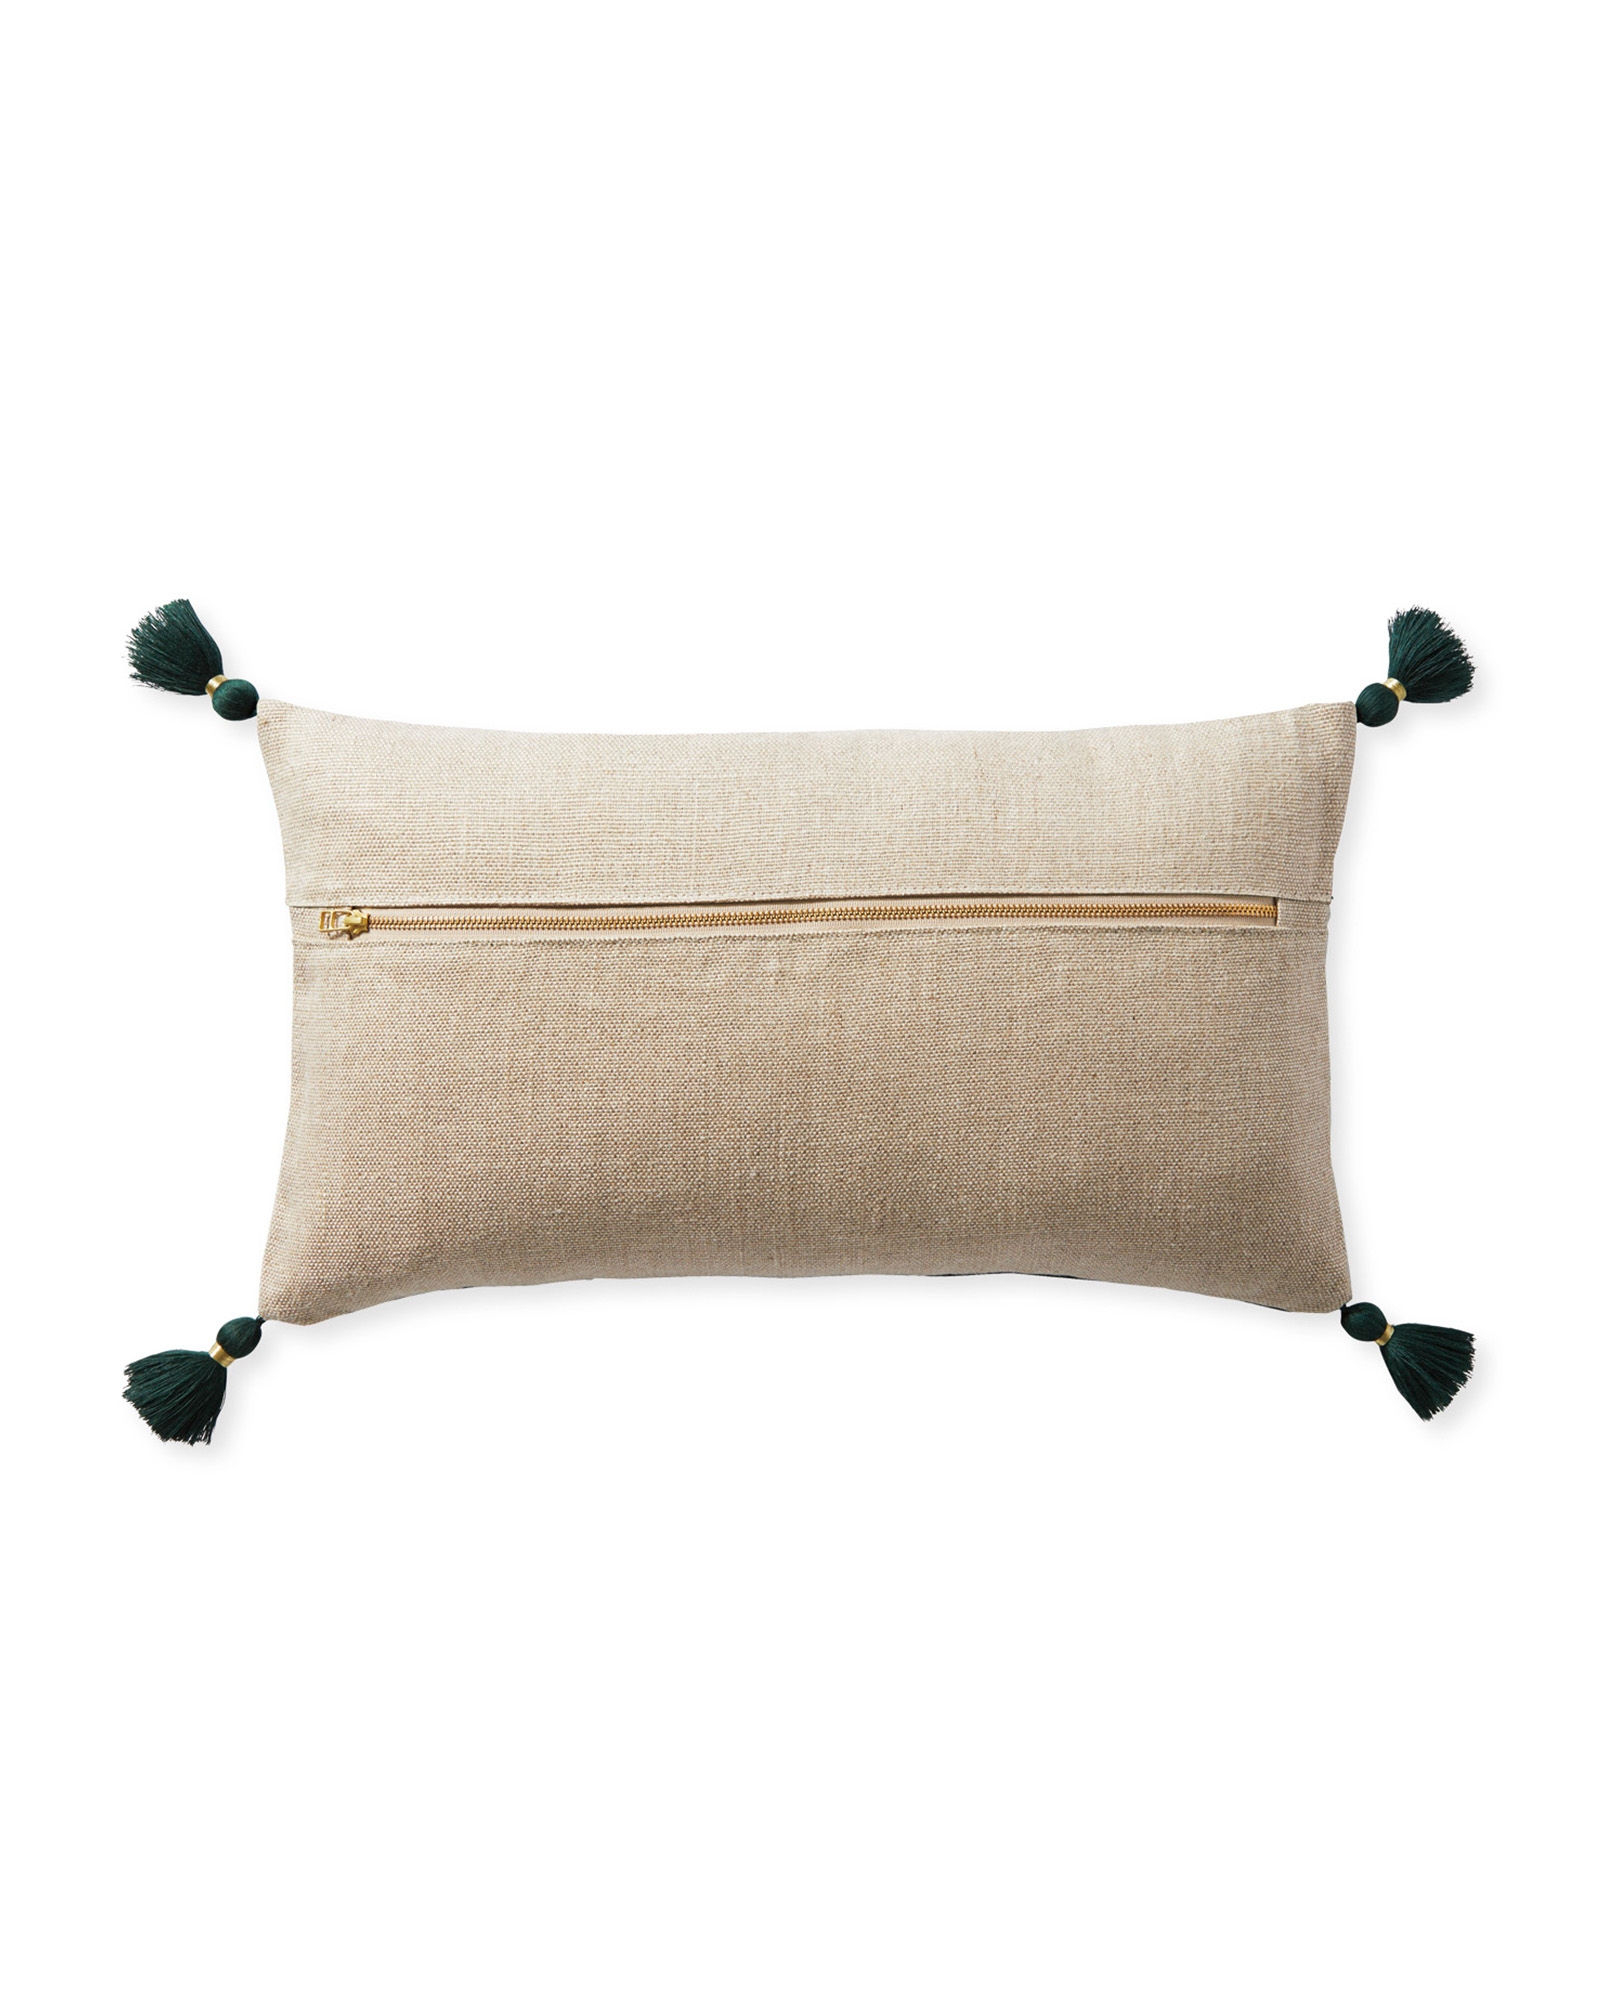 Suede Eva 12" x 21" Pillow Cover - Evergreen - Insert sold separately - Image 1